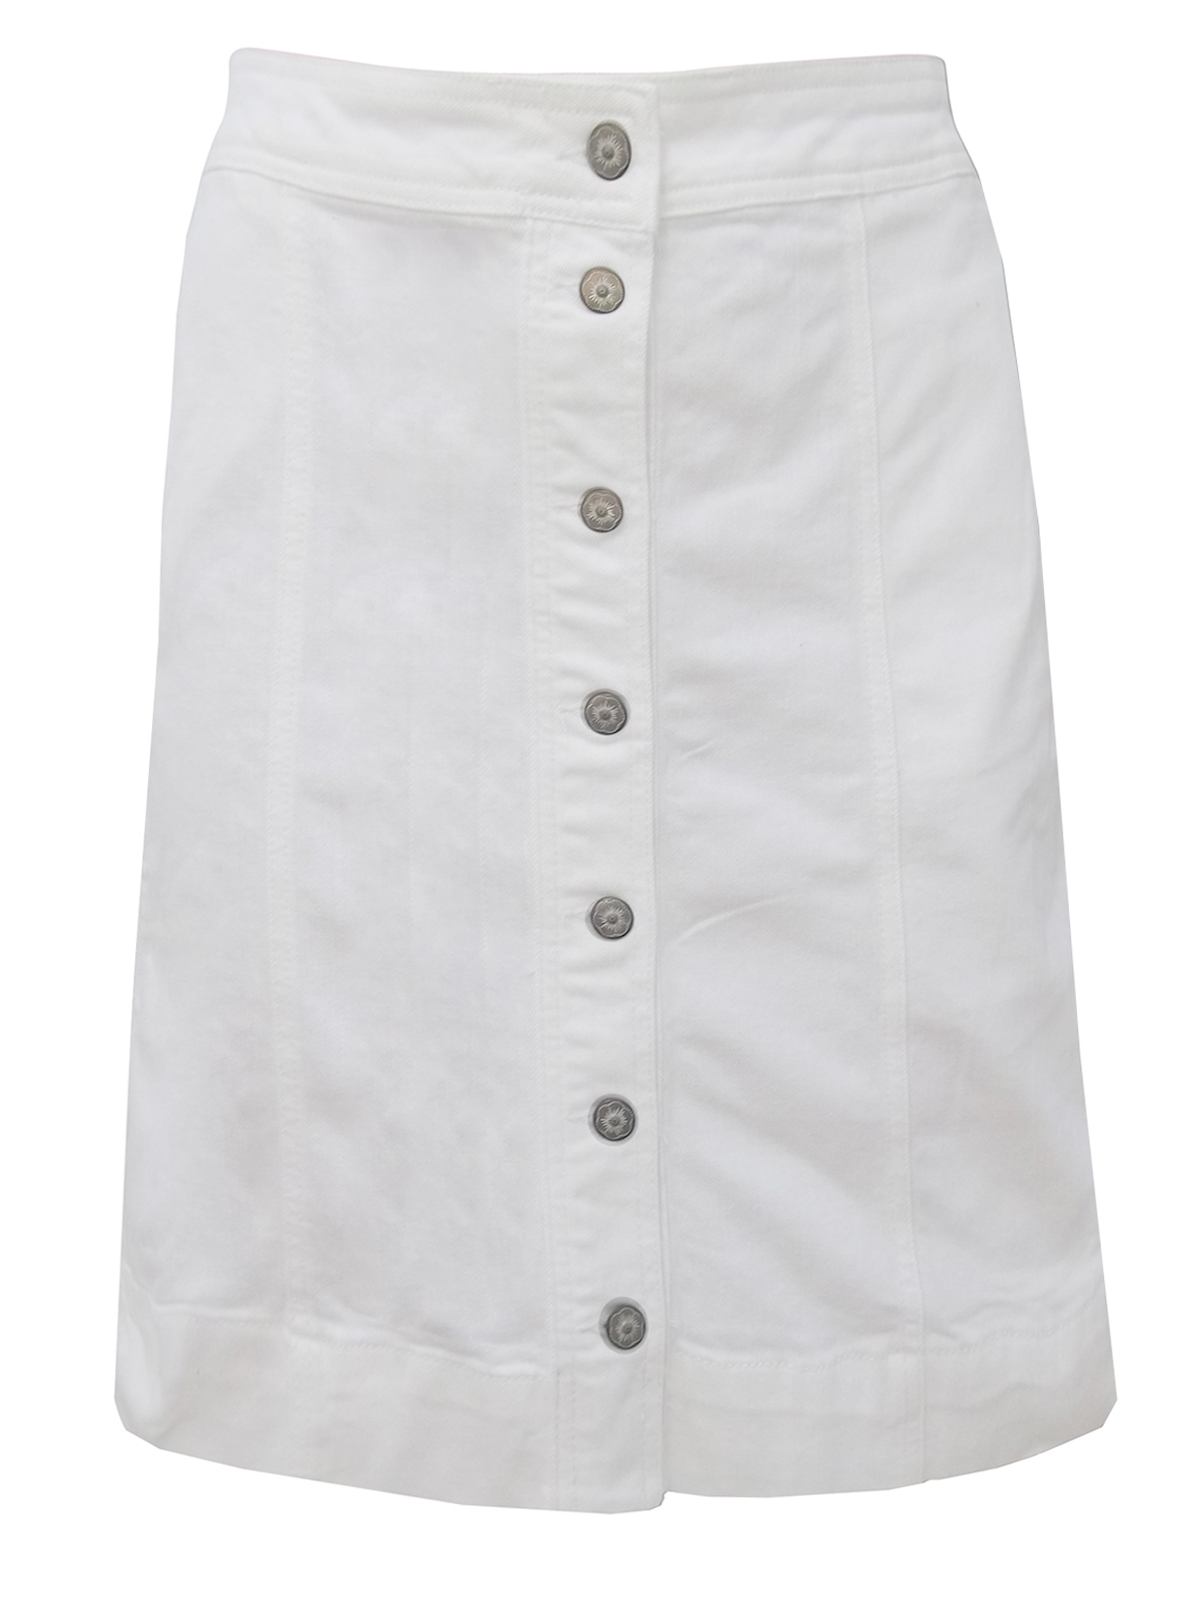 Marks and Spencer - - M&5 WHITE Button Through Denim Skirt - Size 20 to 22